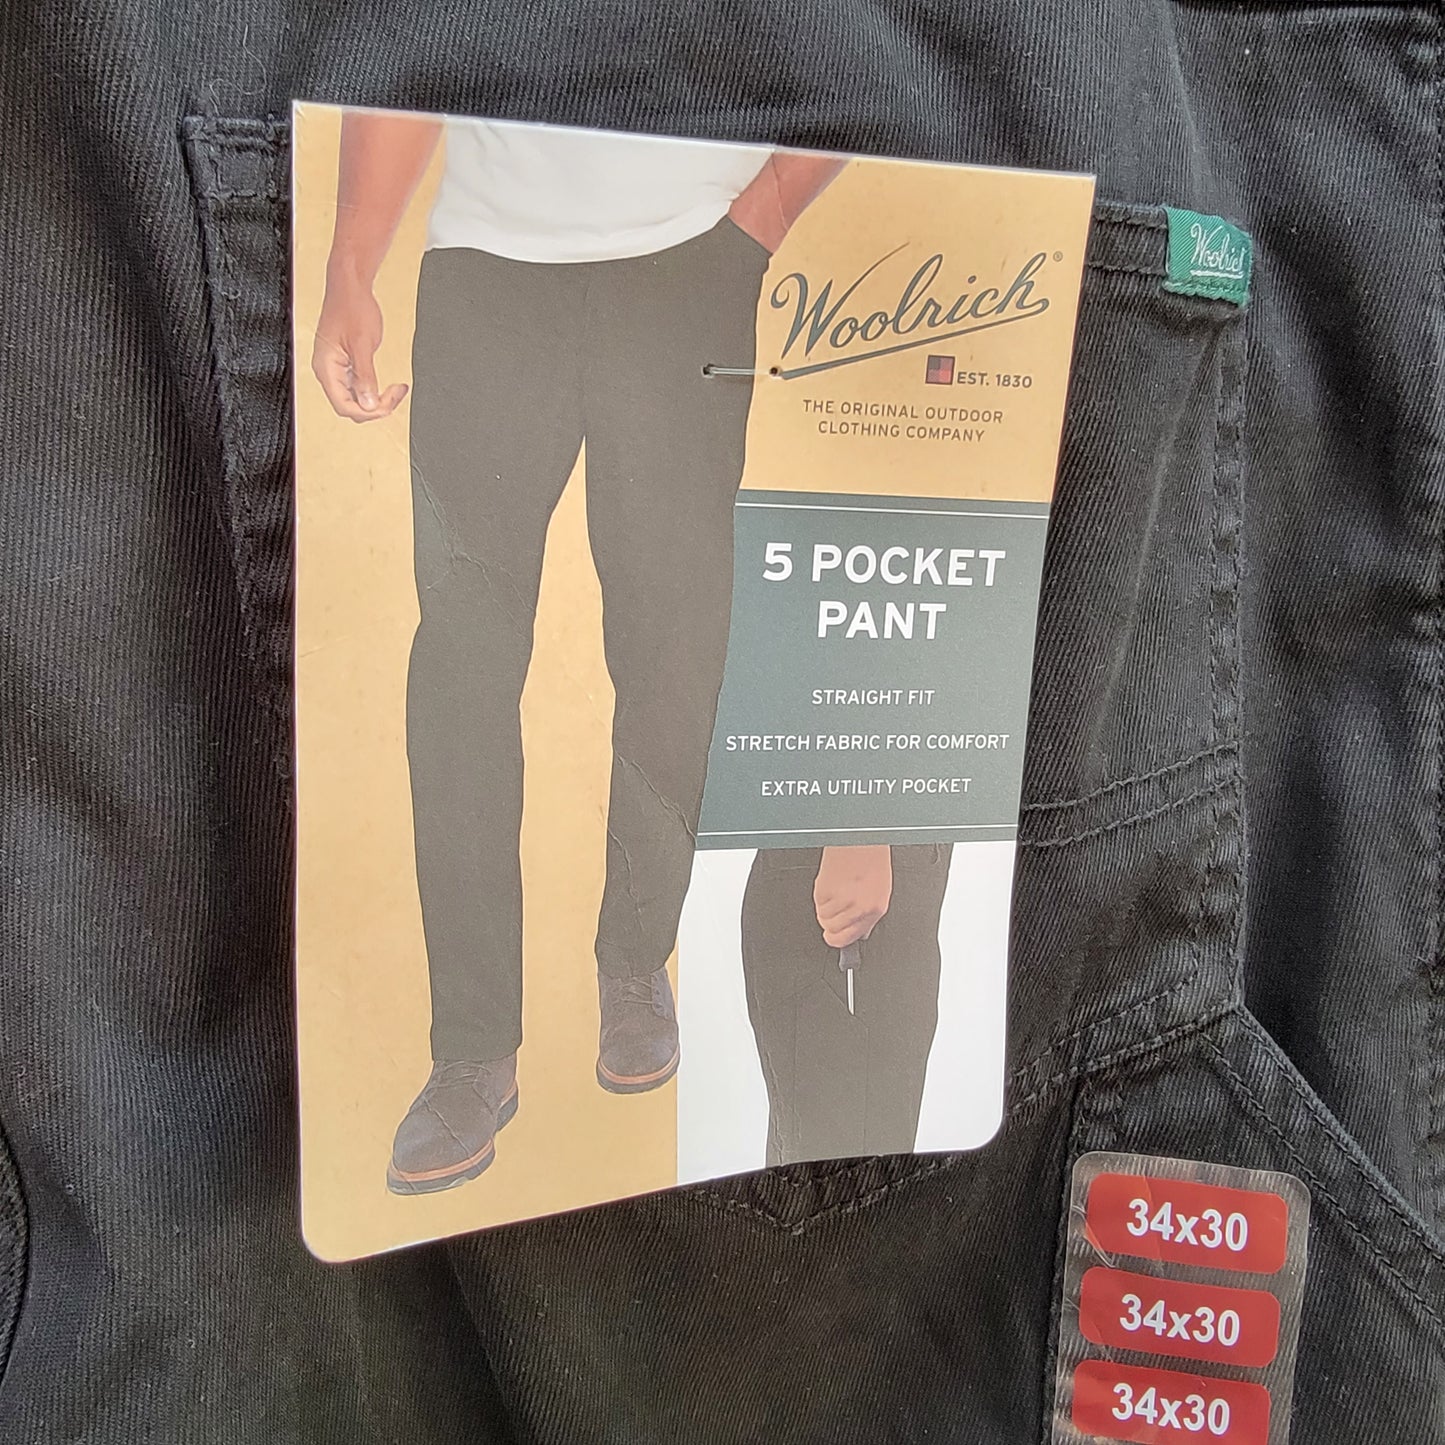 Woolrich Men's 5 Pocket Pant, Color Caviar, Size 34X30, Retail $98.00 New with Tags